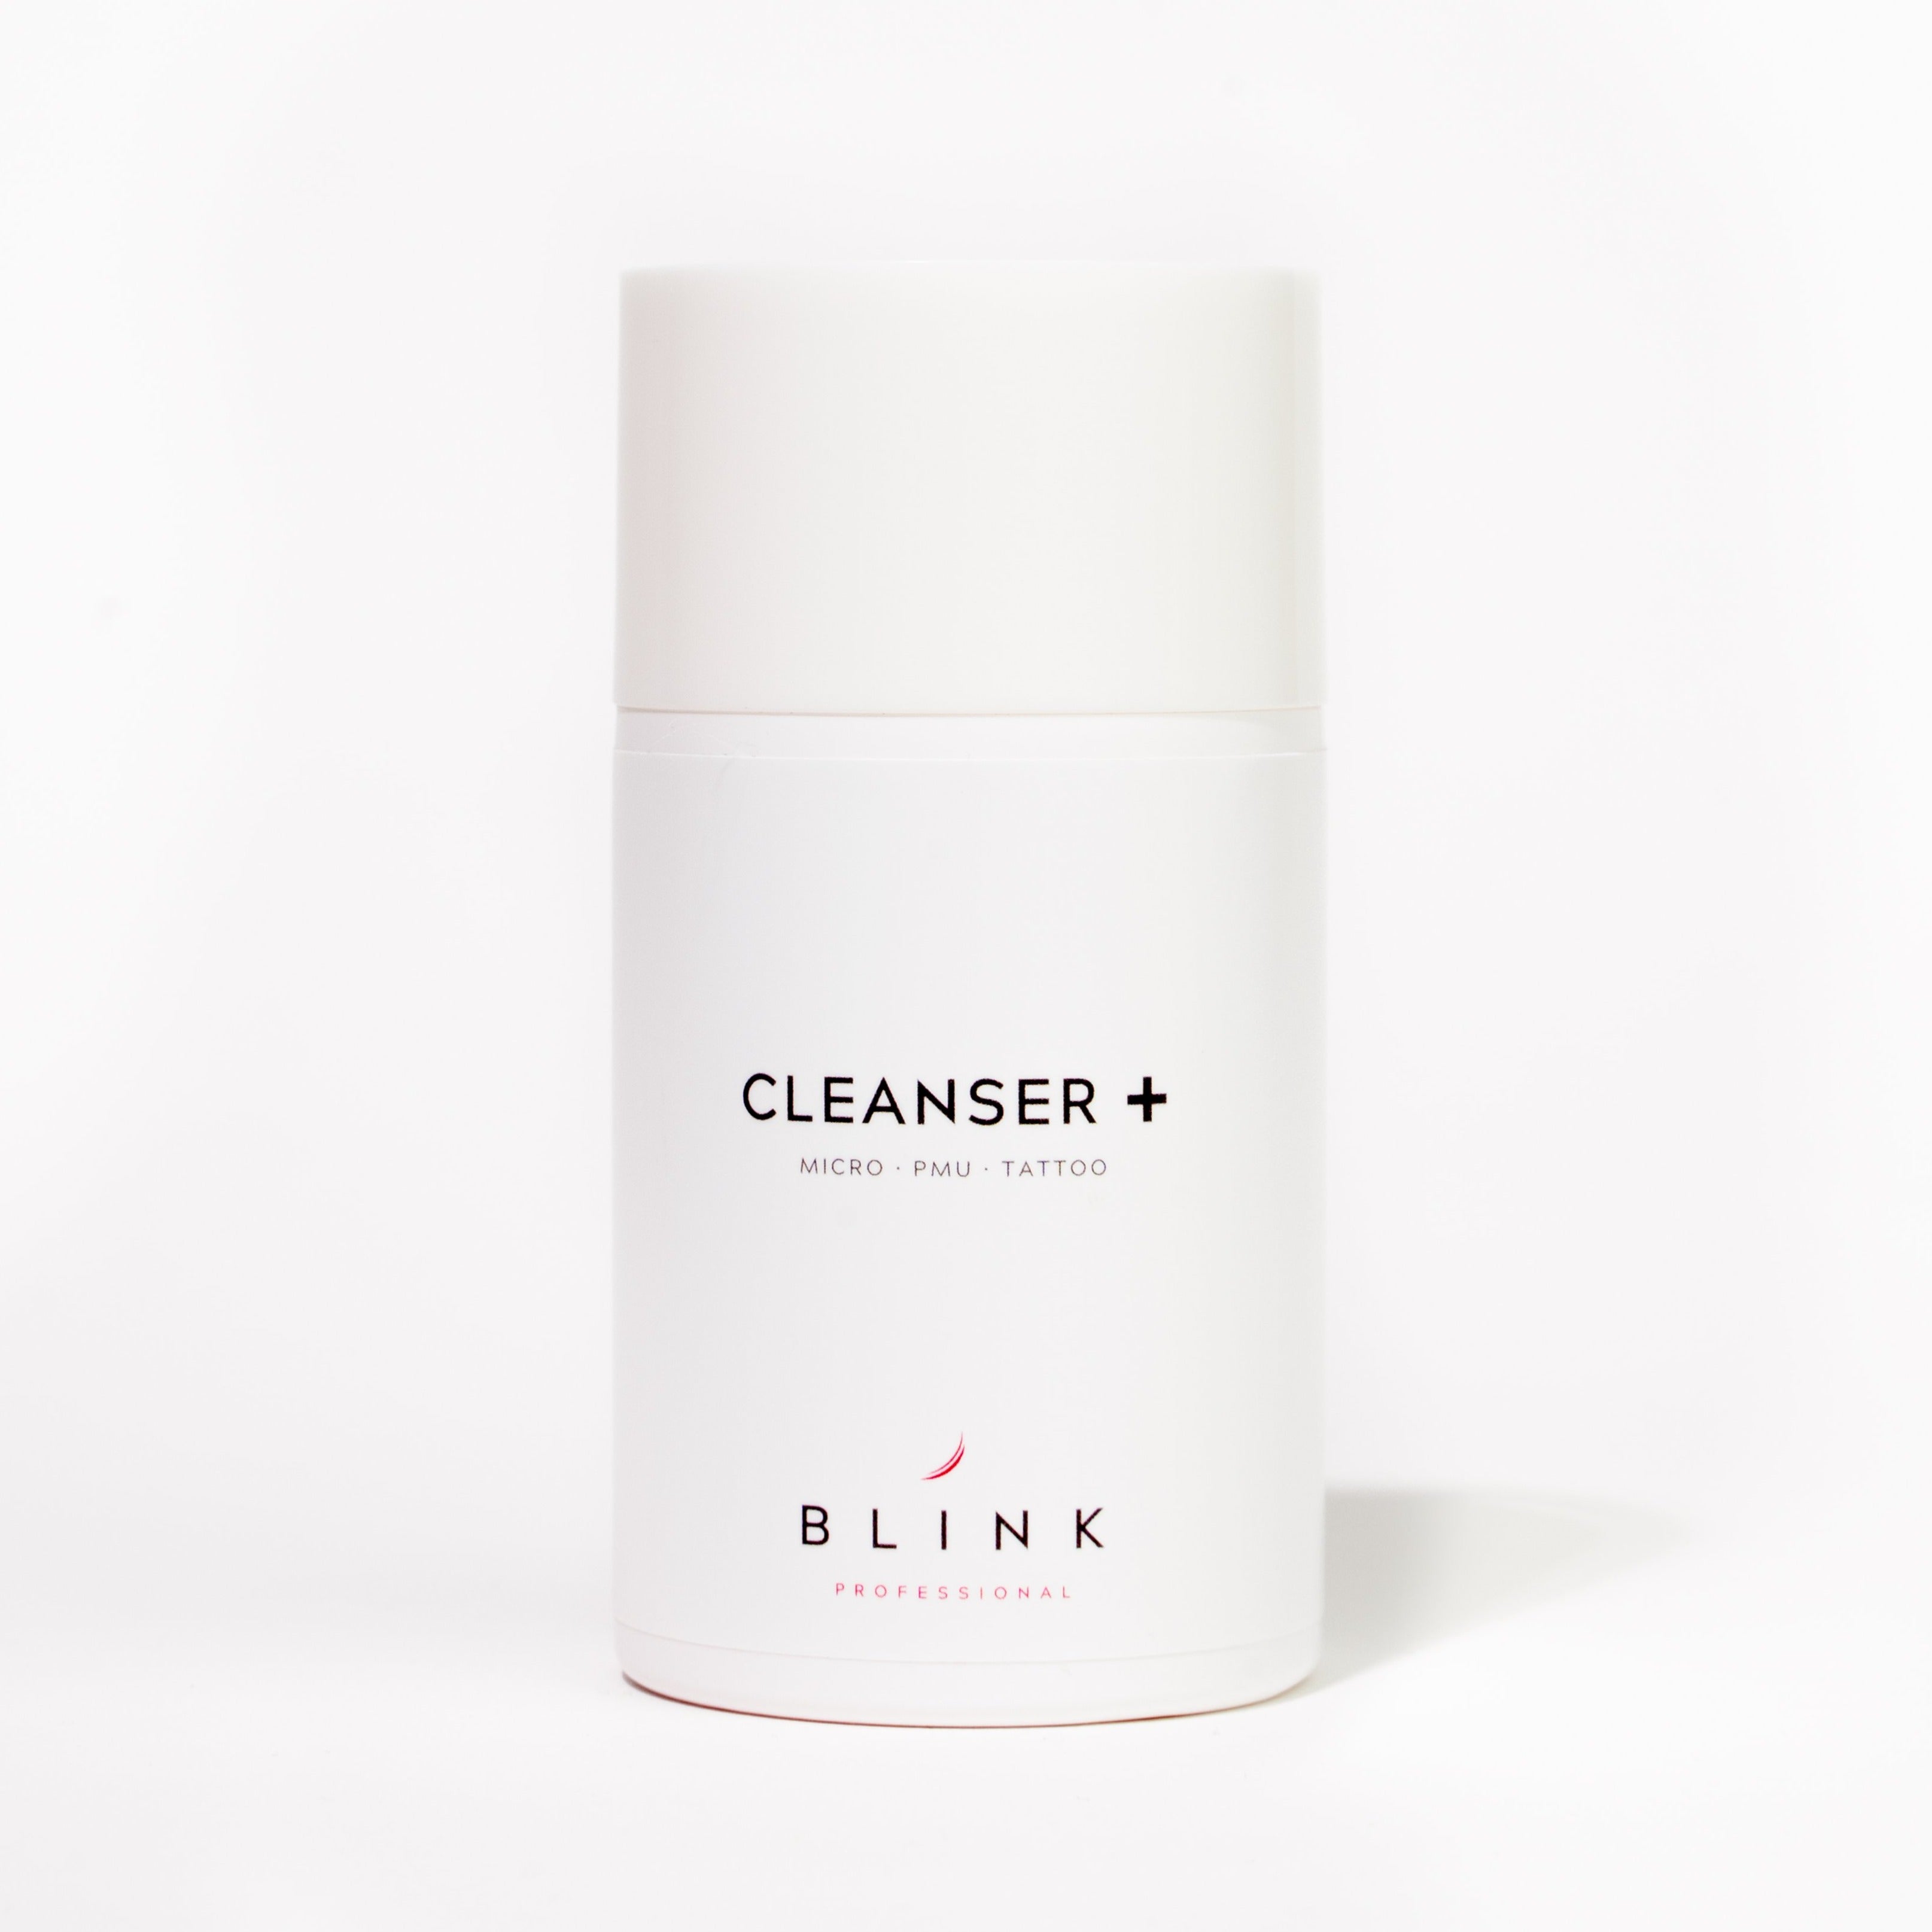 Cleanser +